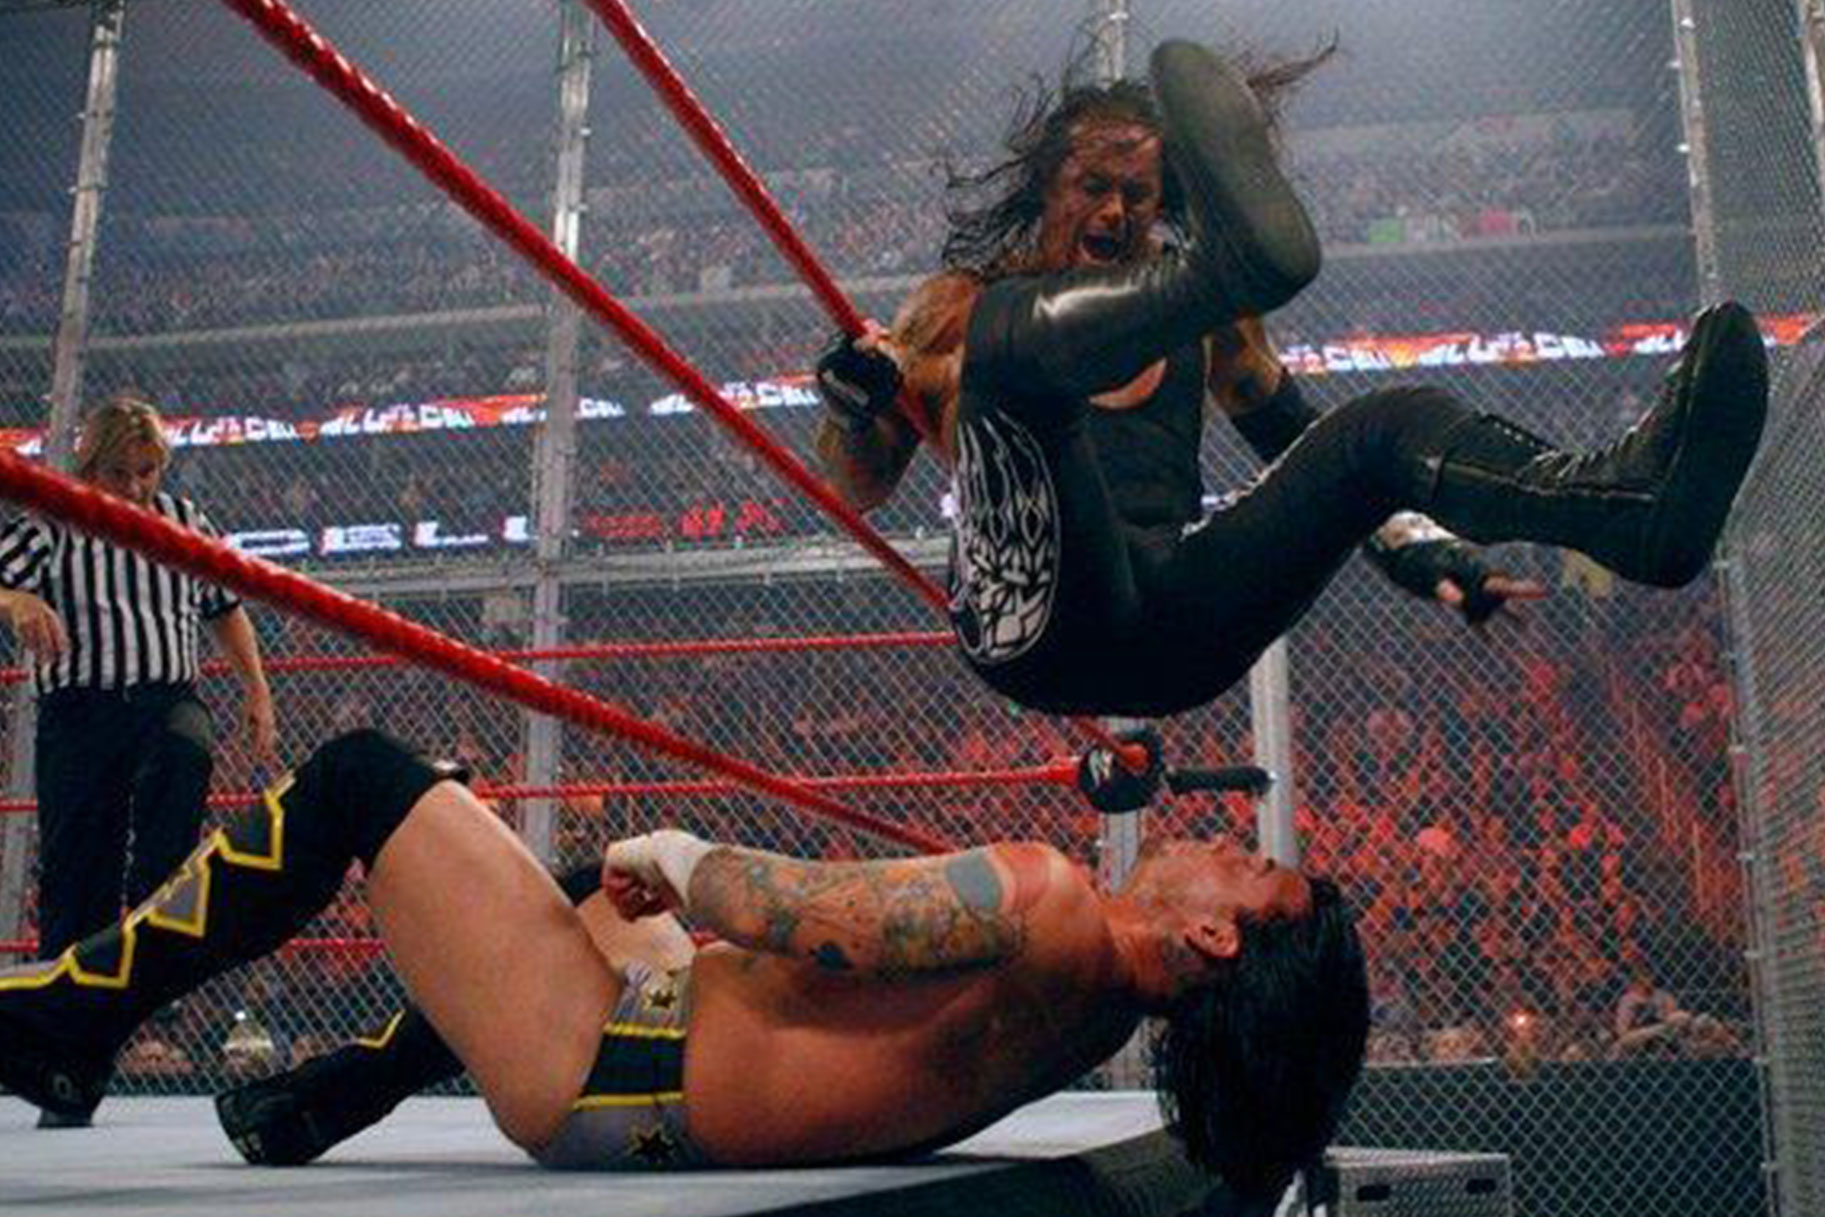 The Undertaker sitting on CMPunk in their 2005 Hell in a Cell match